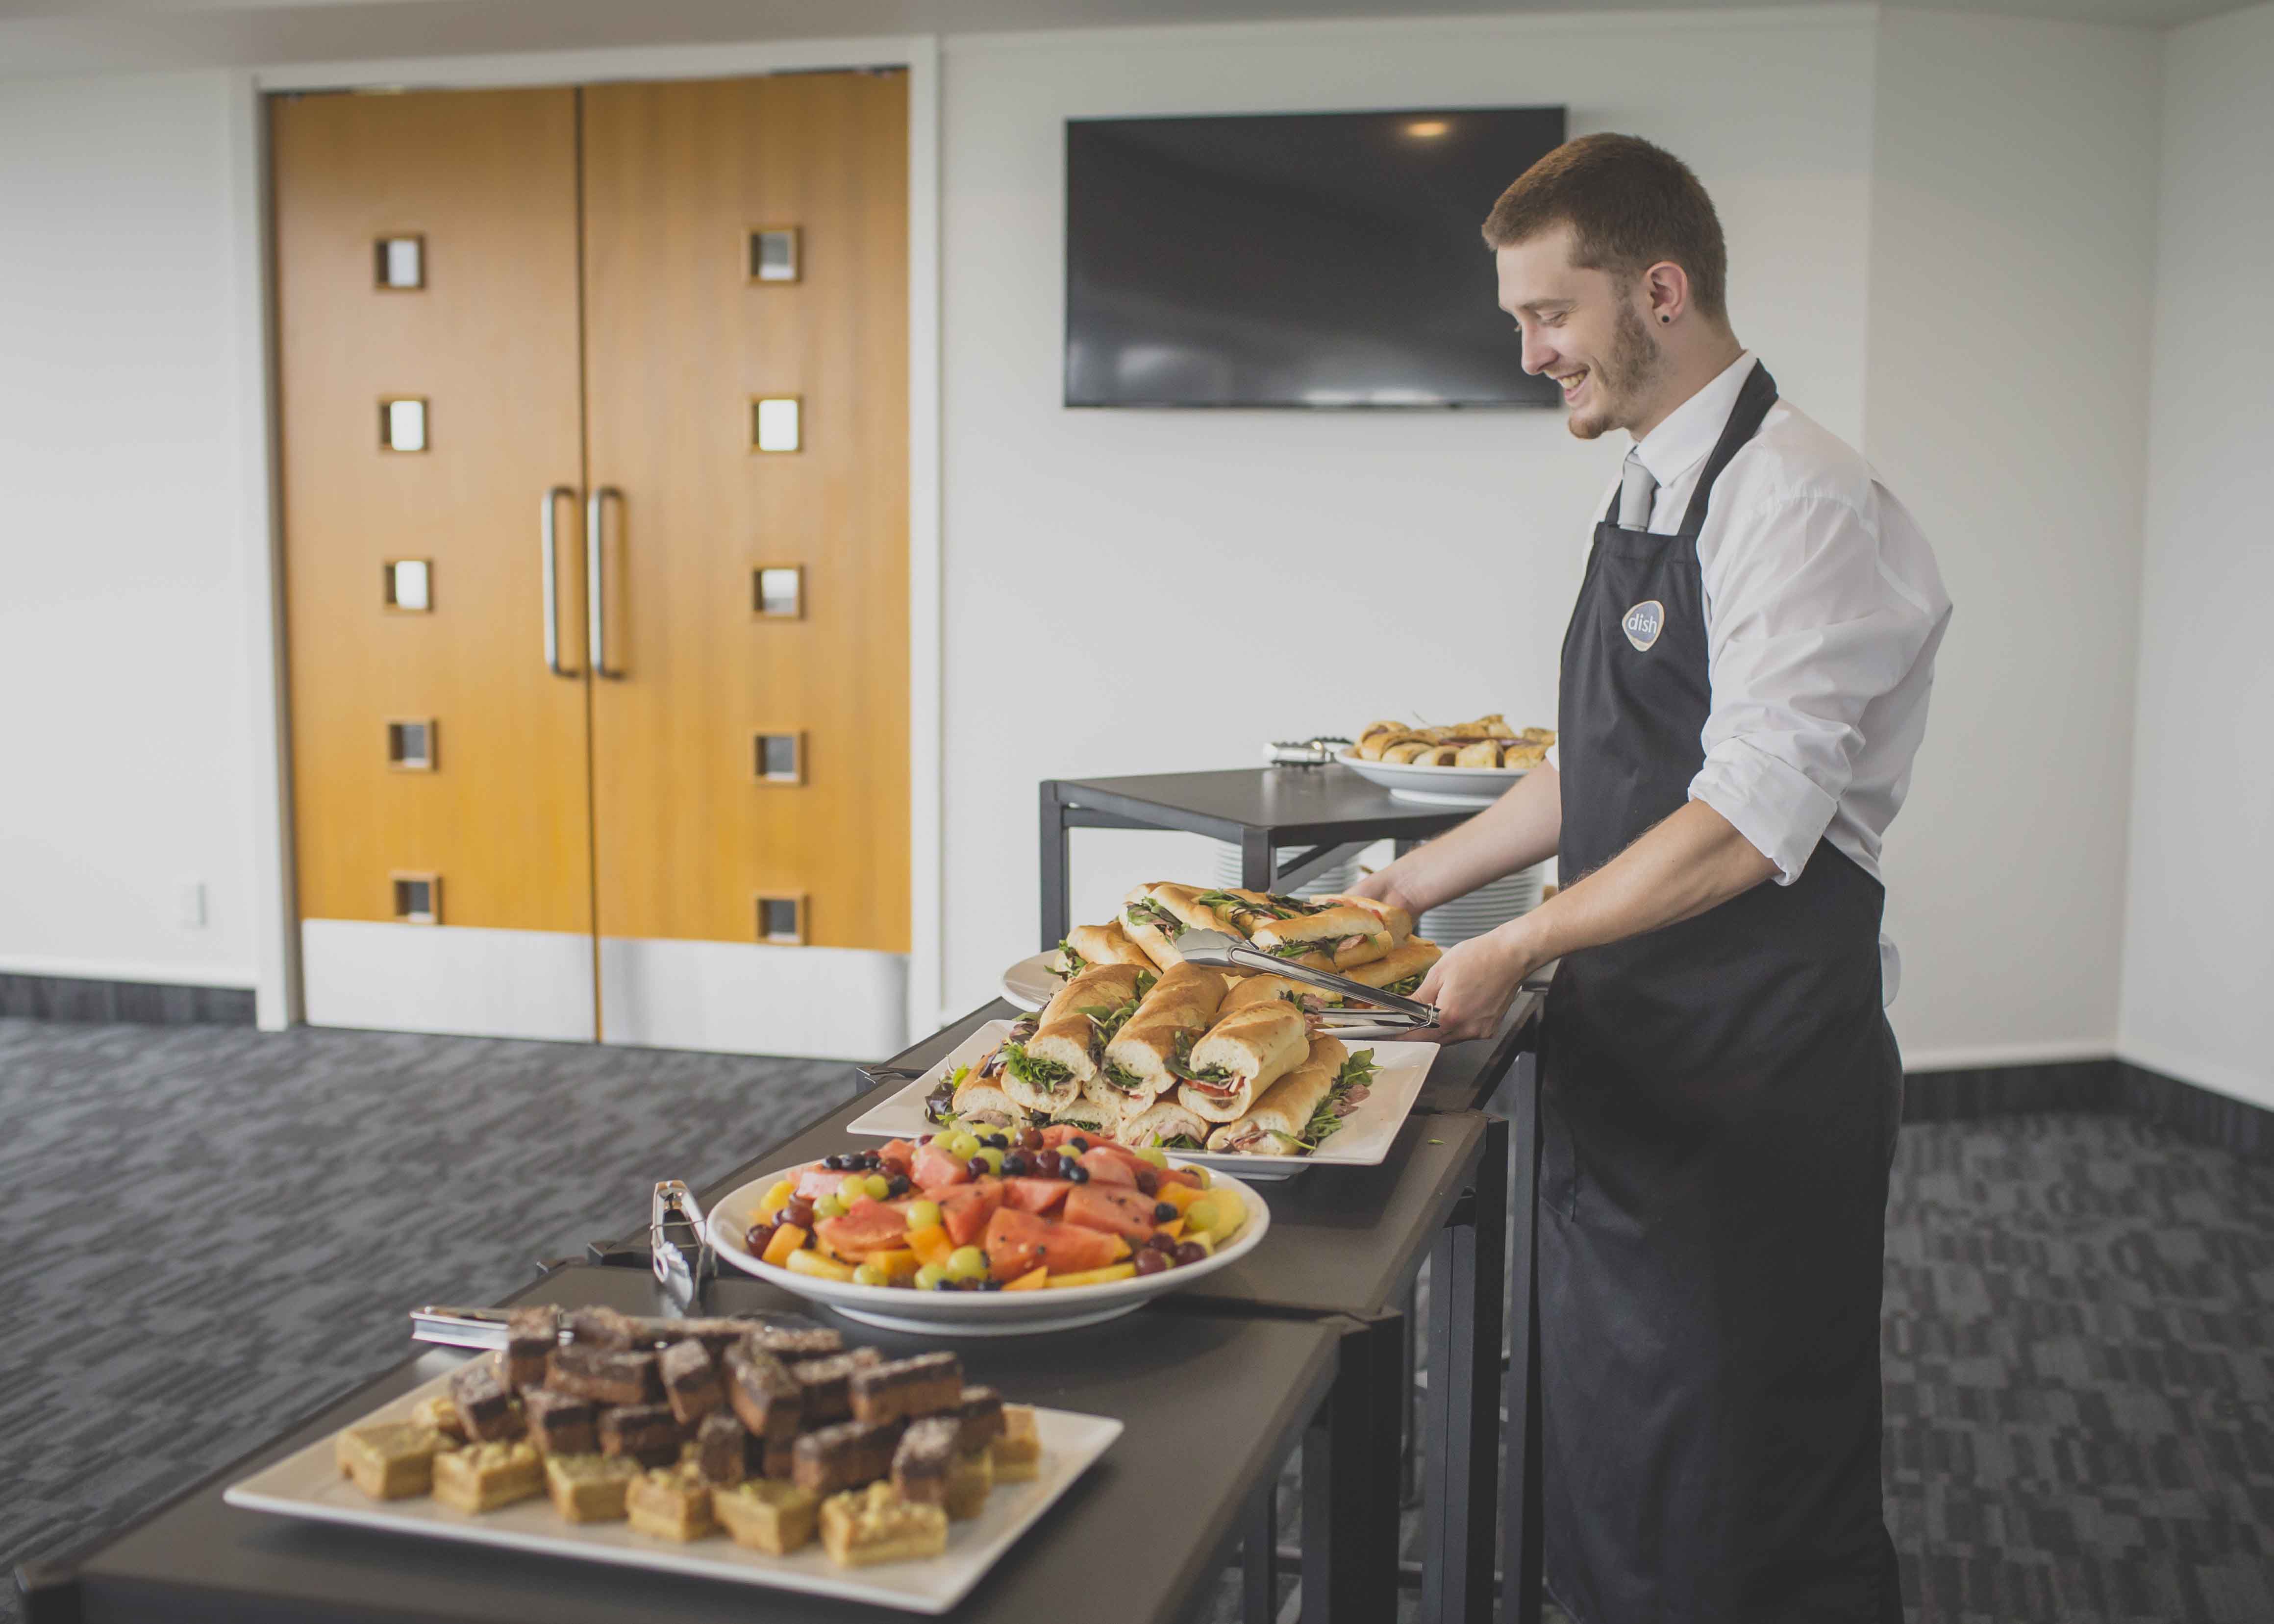 Dish Catering provide a wide range of delicious menu options for your meeting or event